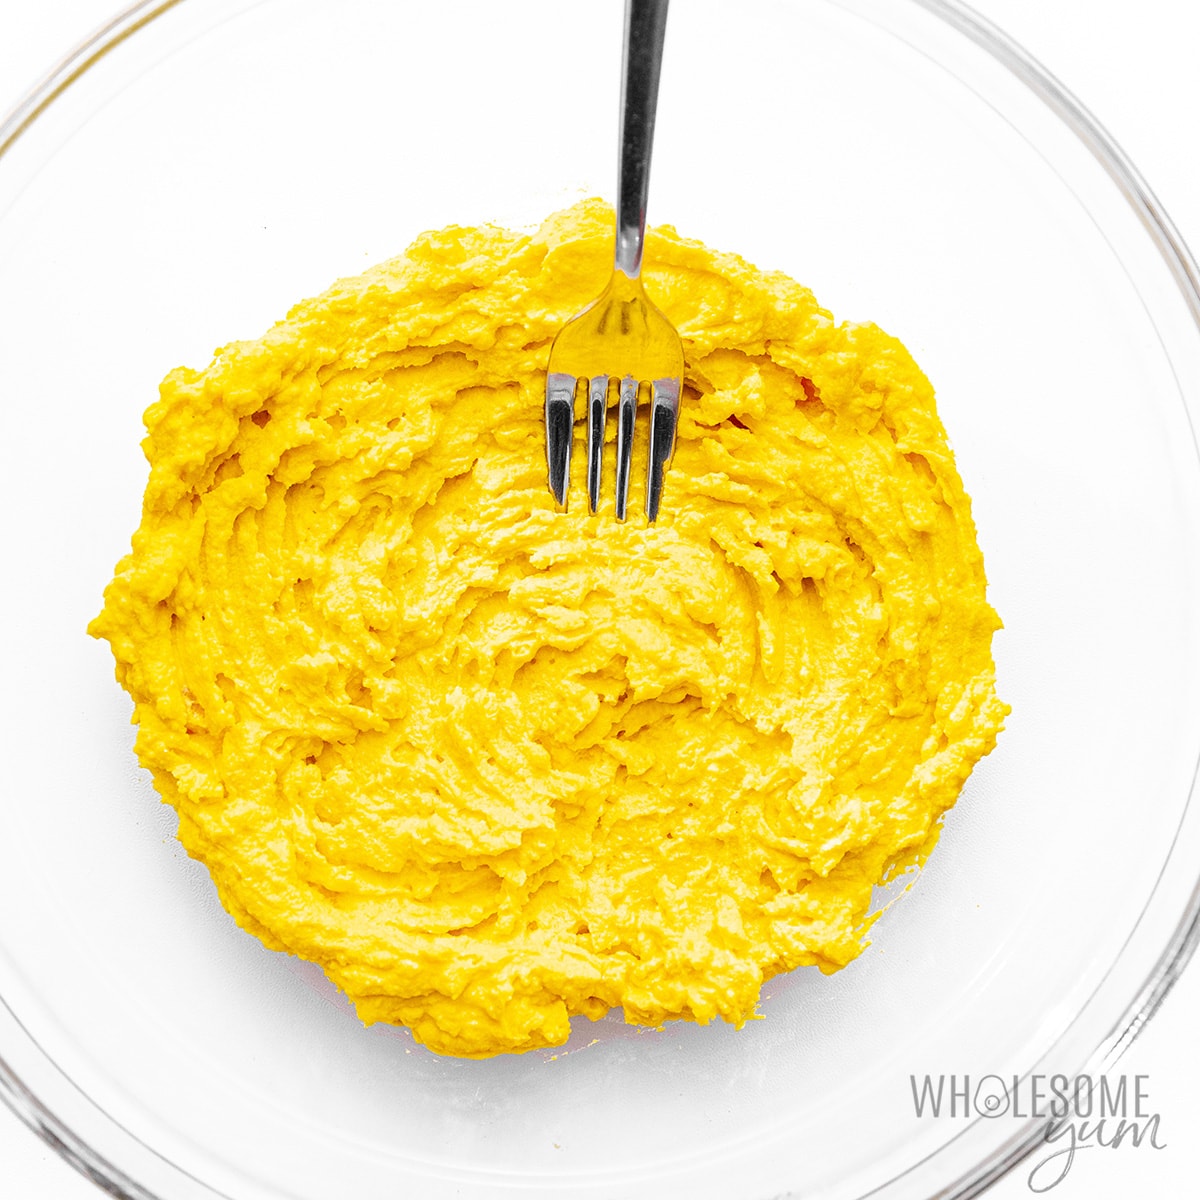 Yolks mixed with mayo and other ingredients in a bowl.